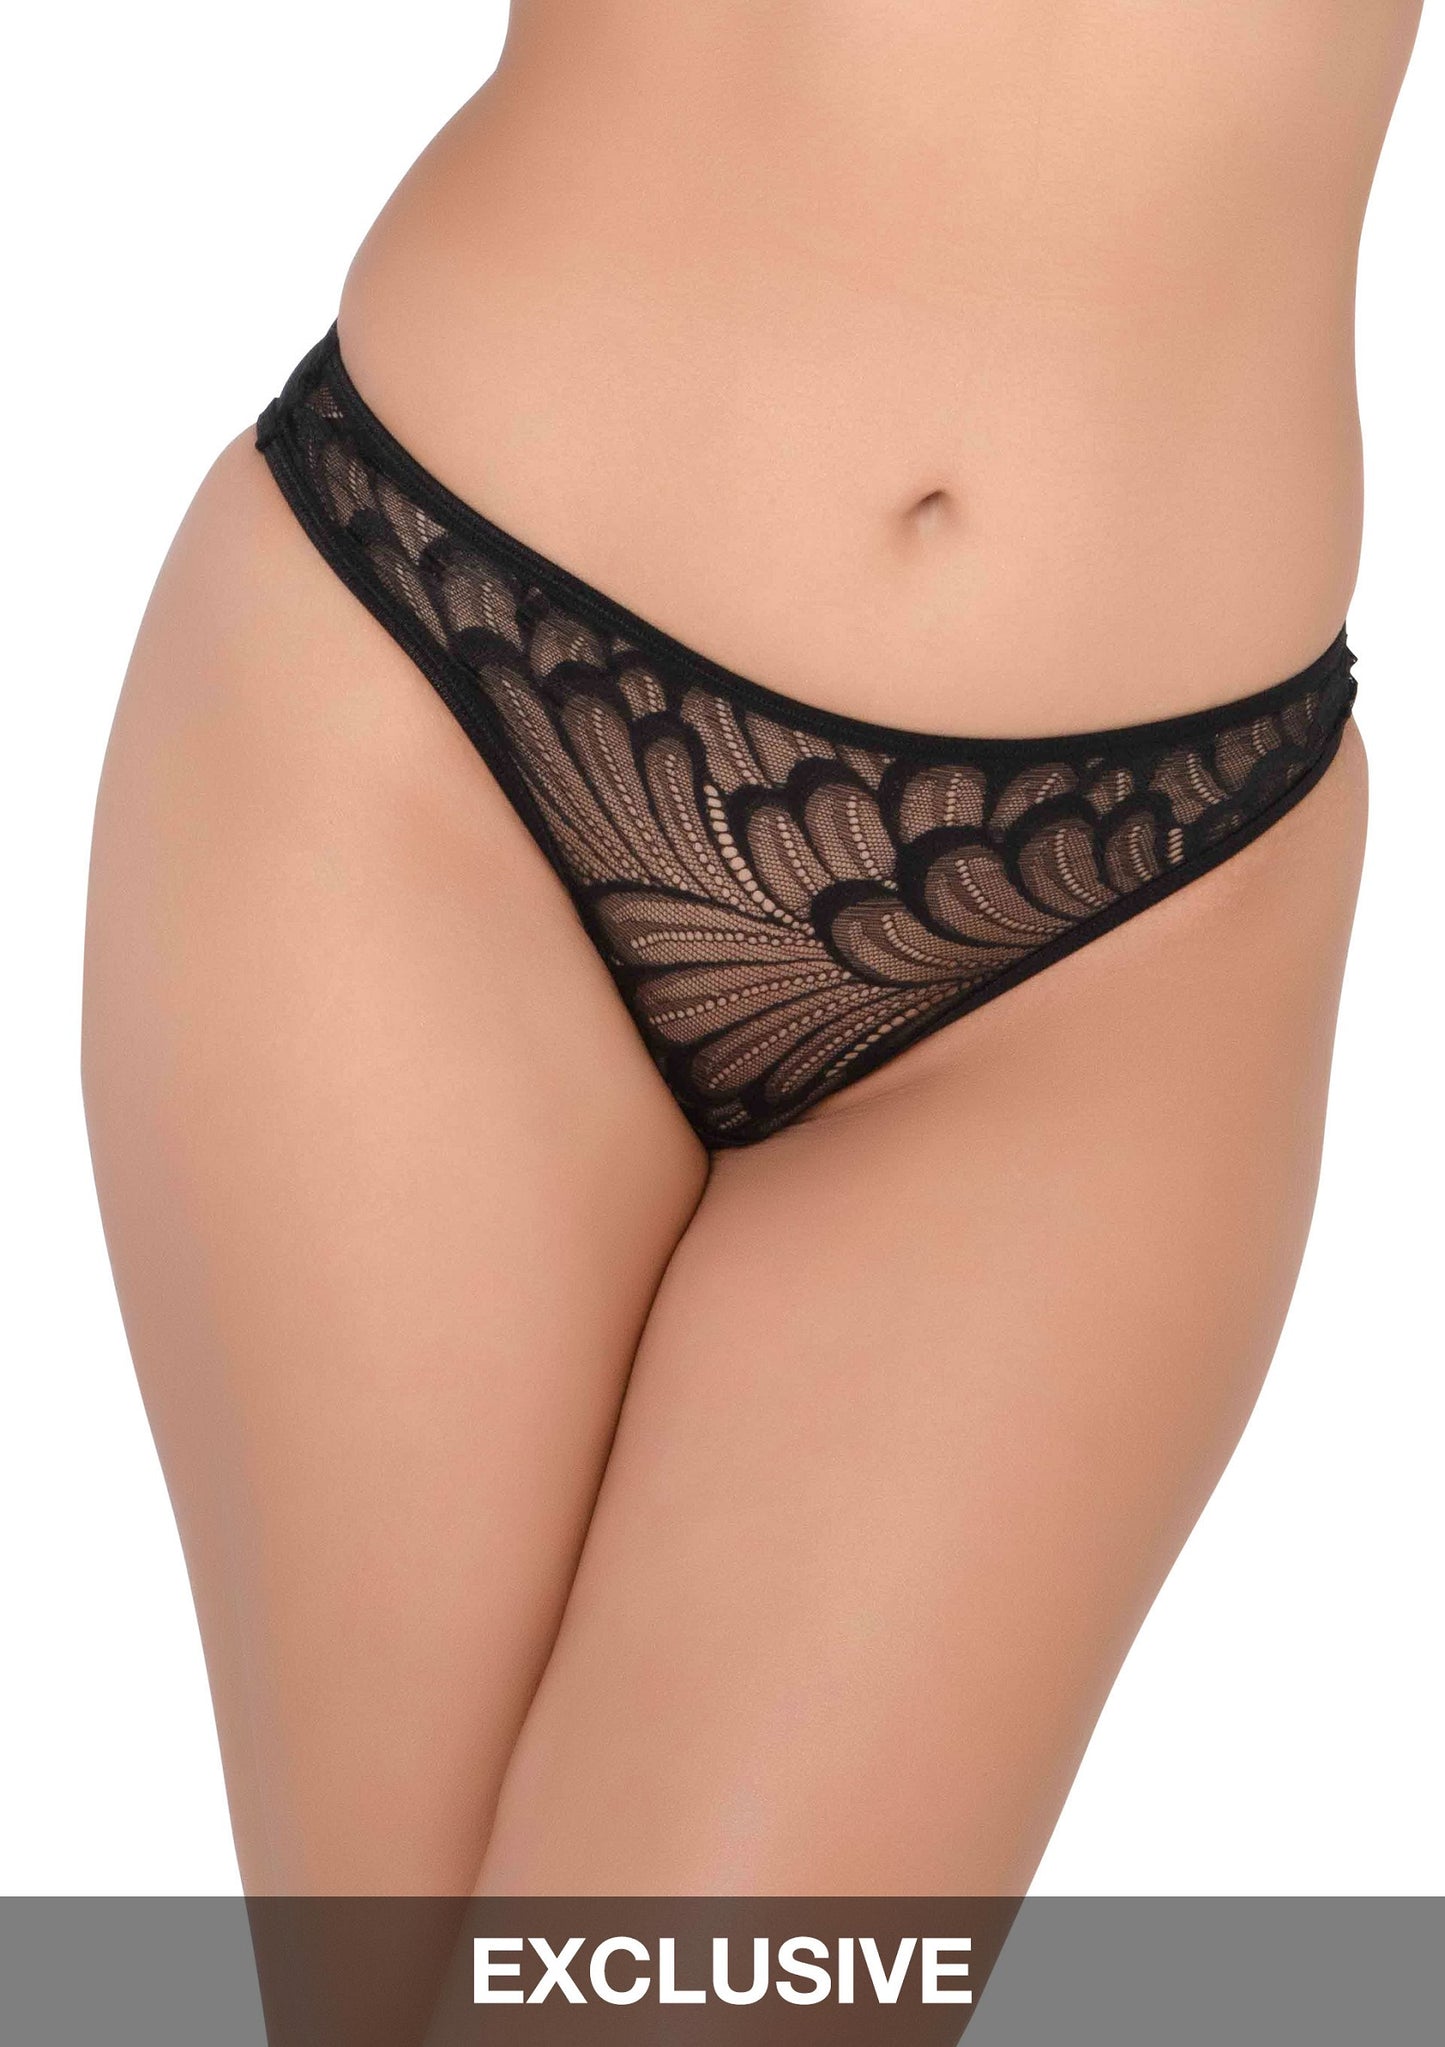 Daring Intimates Mix & Match Hiphugger with ruched back BLACK S/M - 5